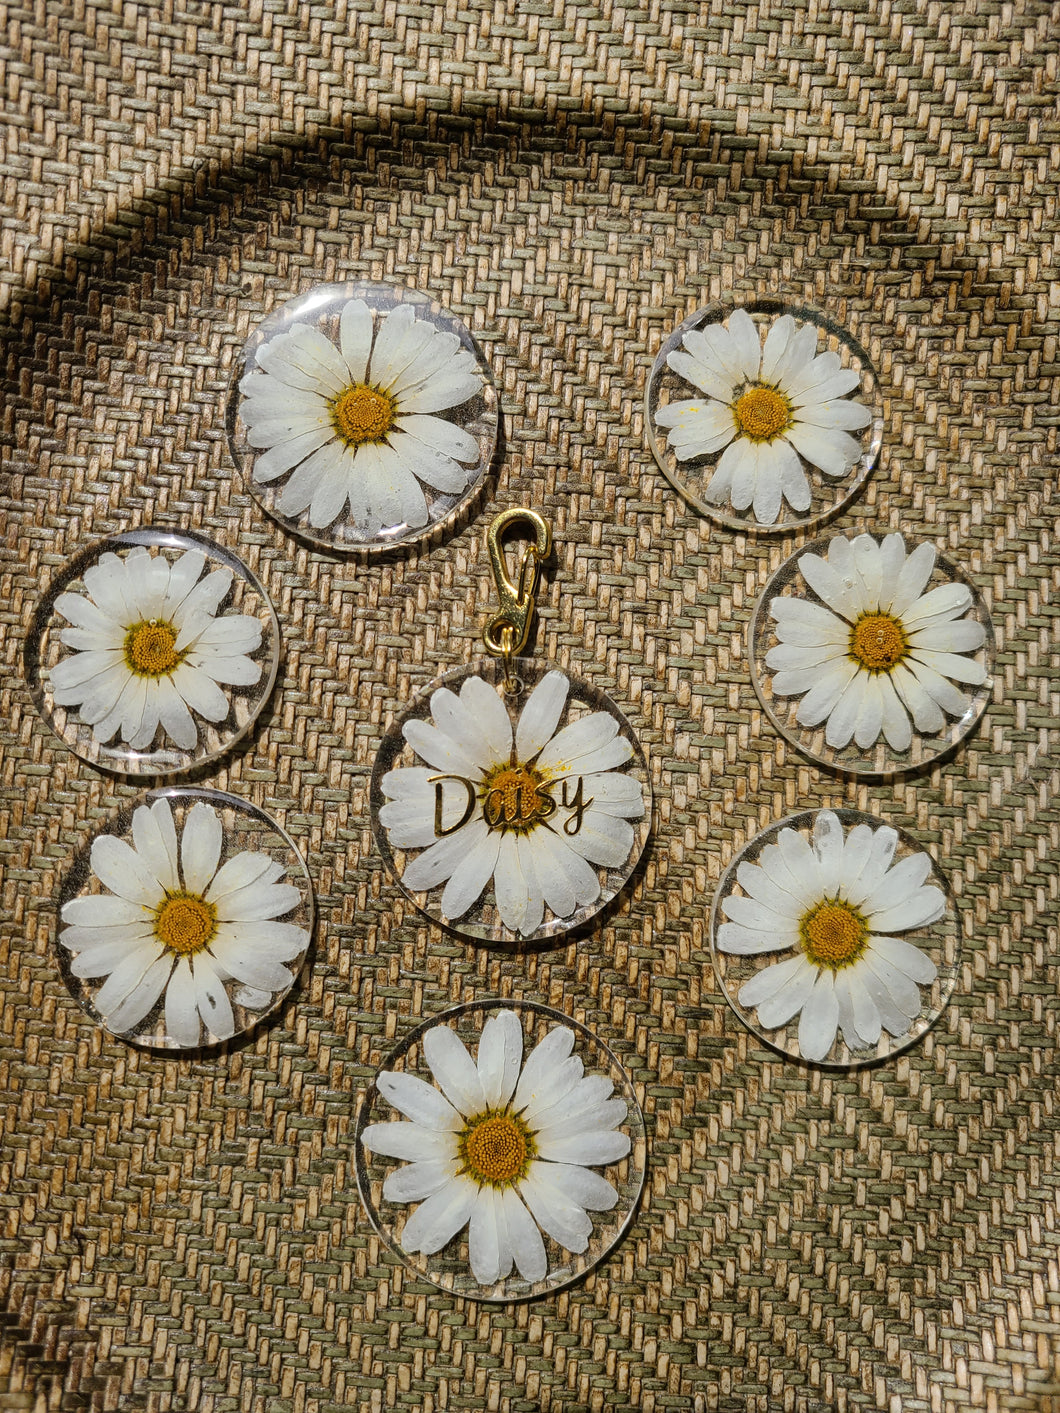 Small Dog Tag- White Daisy, 1.75 inches in diamerer